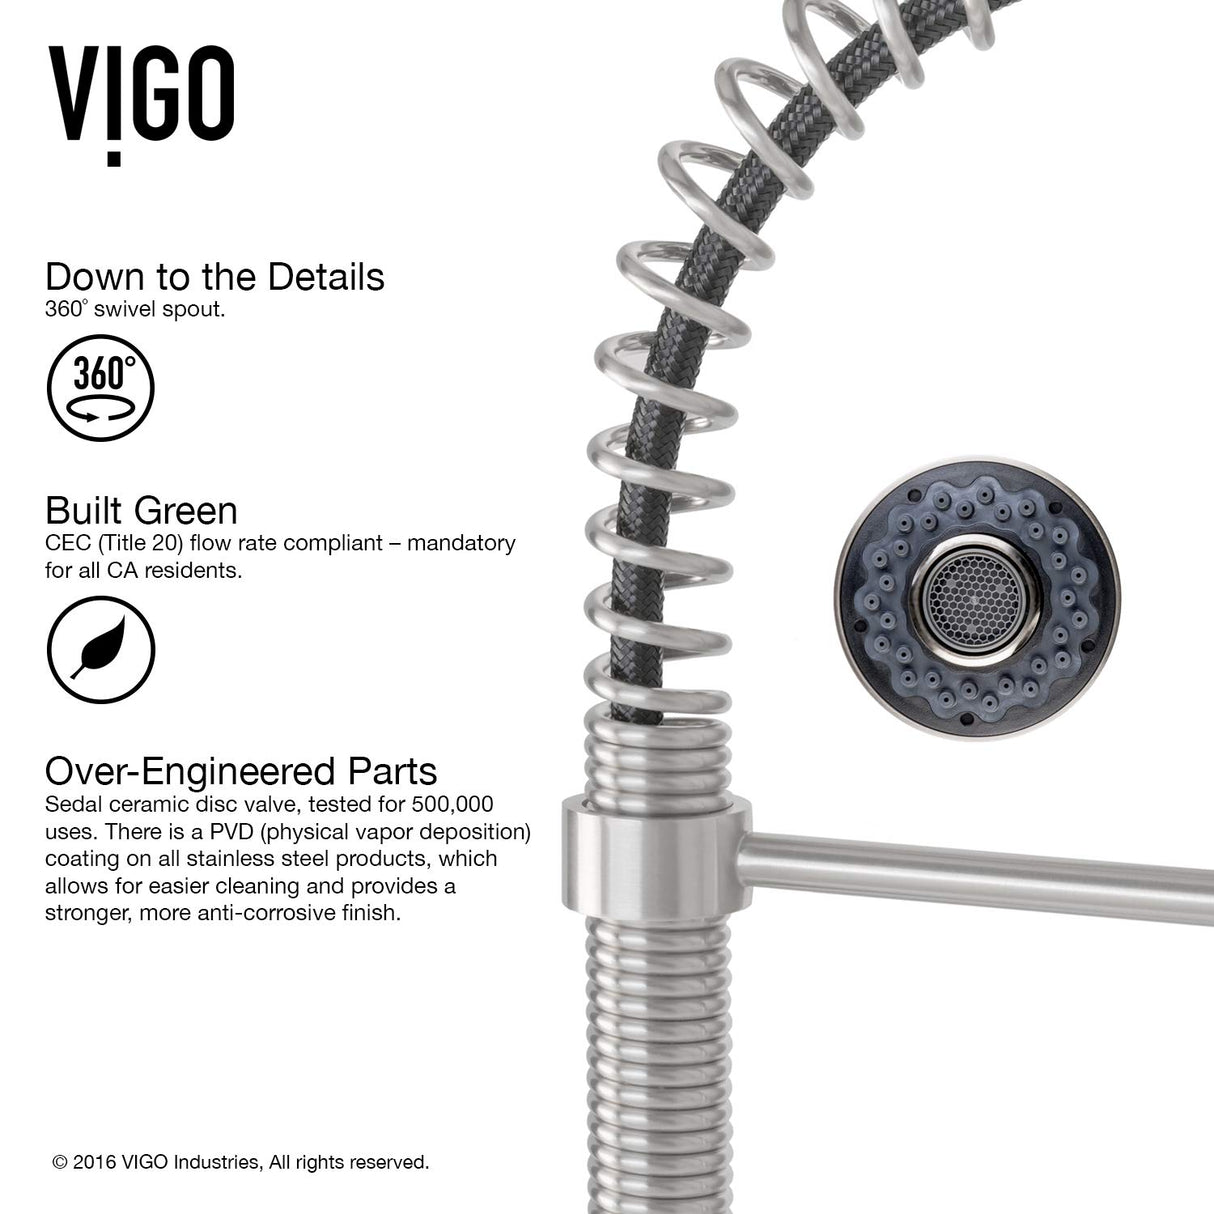 VIGO VG02001STK1 19" H Edison Single-Handle with Pull-Down Sprayer Kitchen Faucet with Deck Plate in Stainless Steel